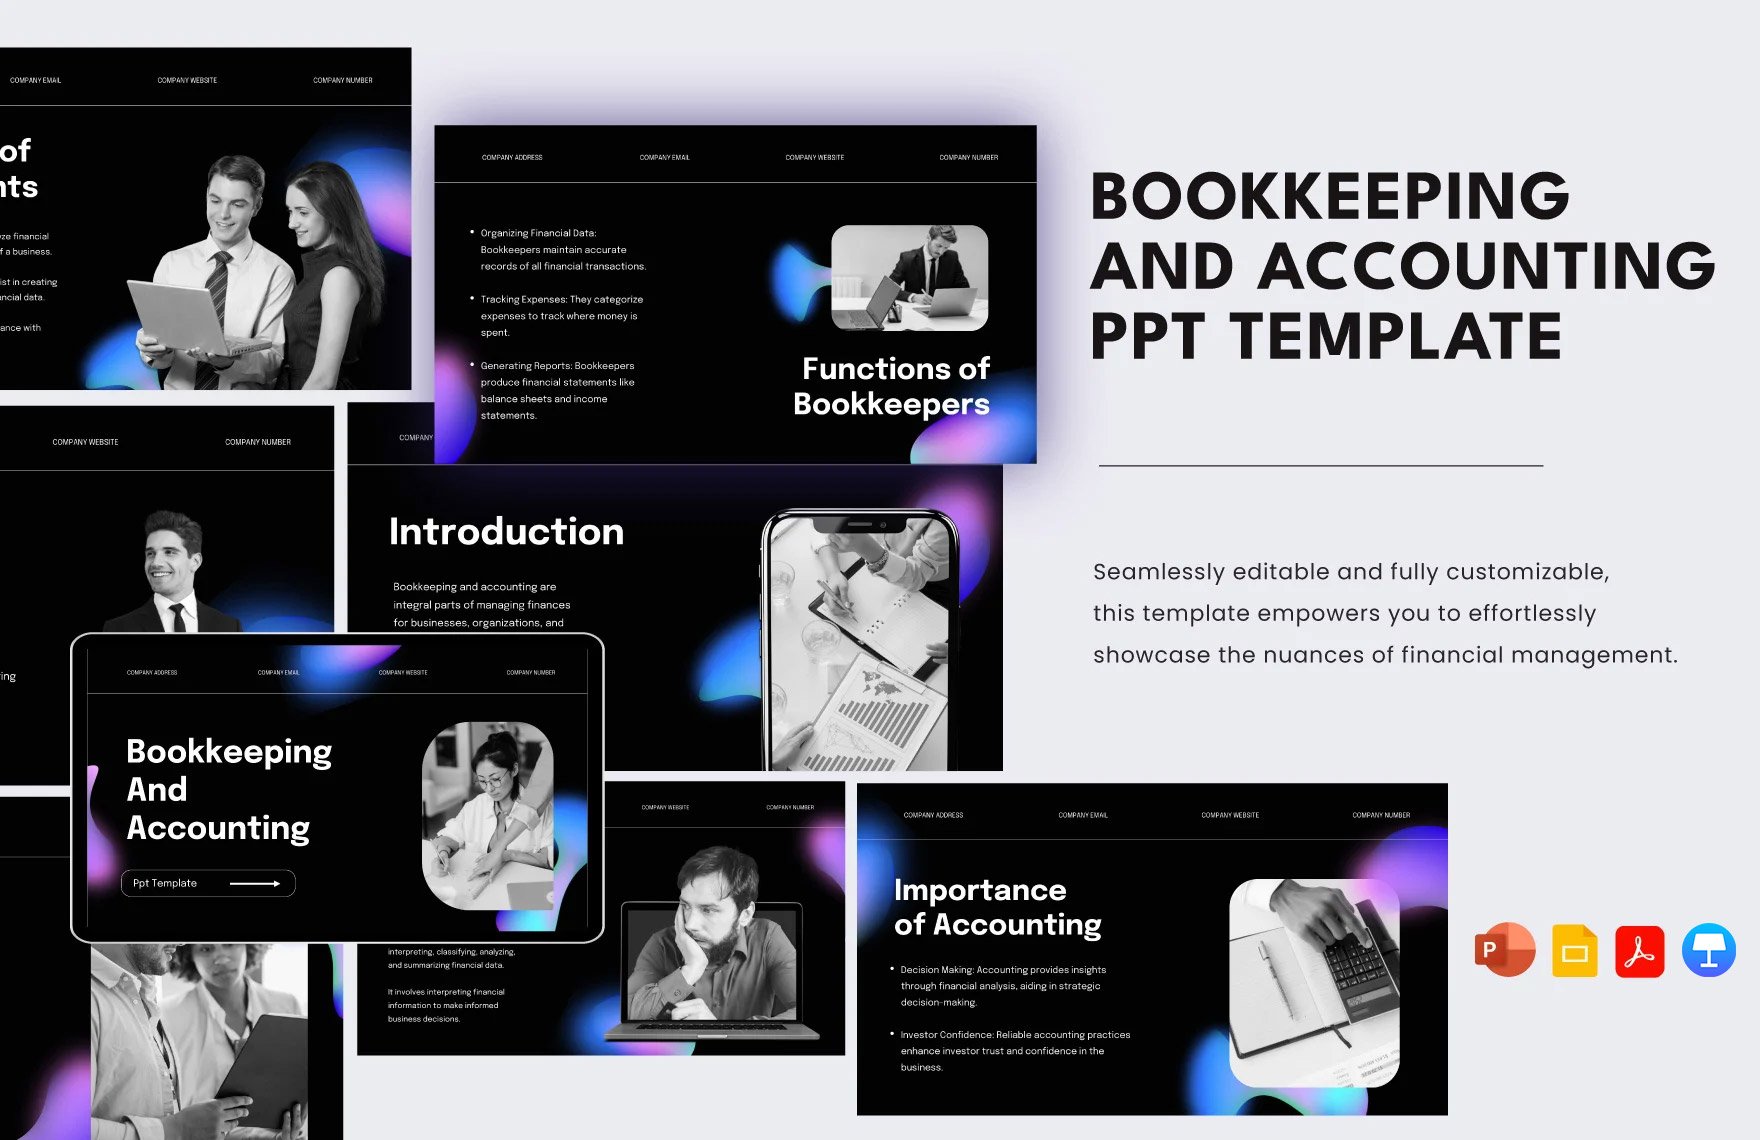 Bookkeeping and Accounting PPT Template in PDF, PowerPoint, Google Slides, Apple Keynote